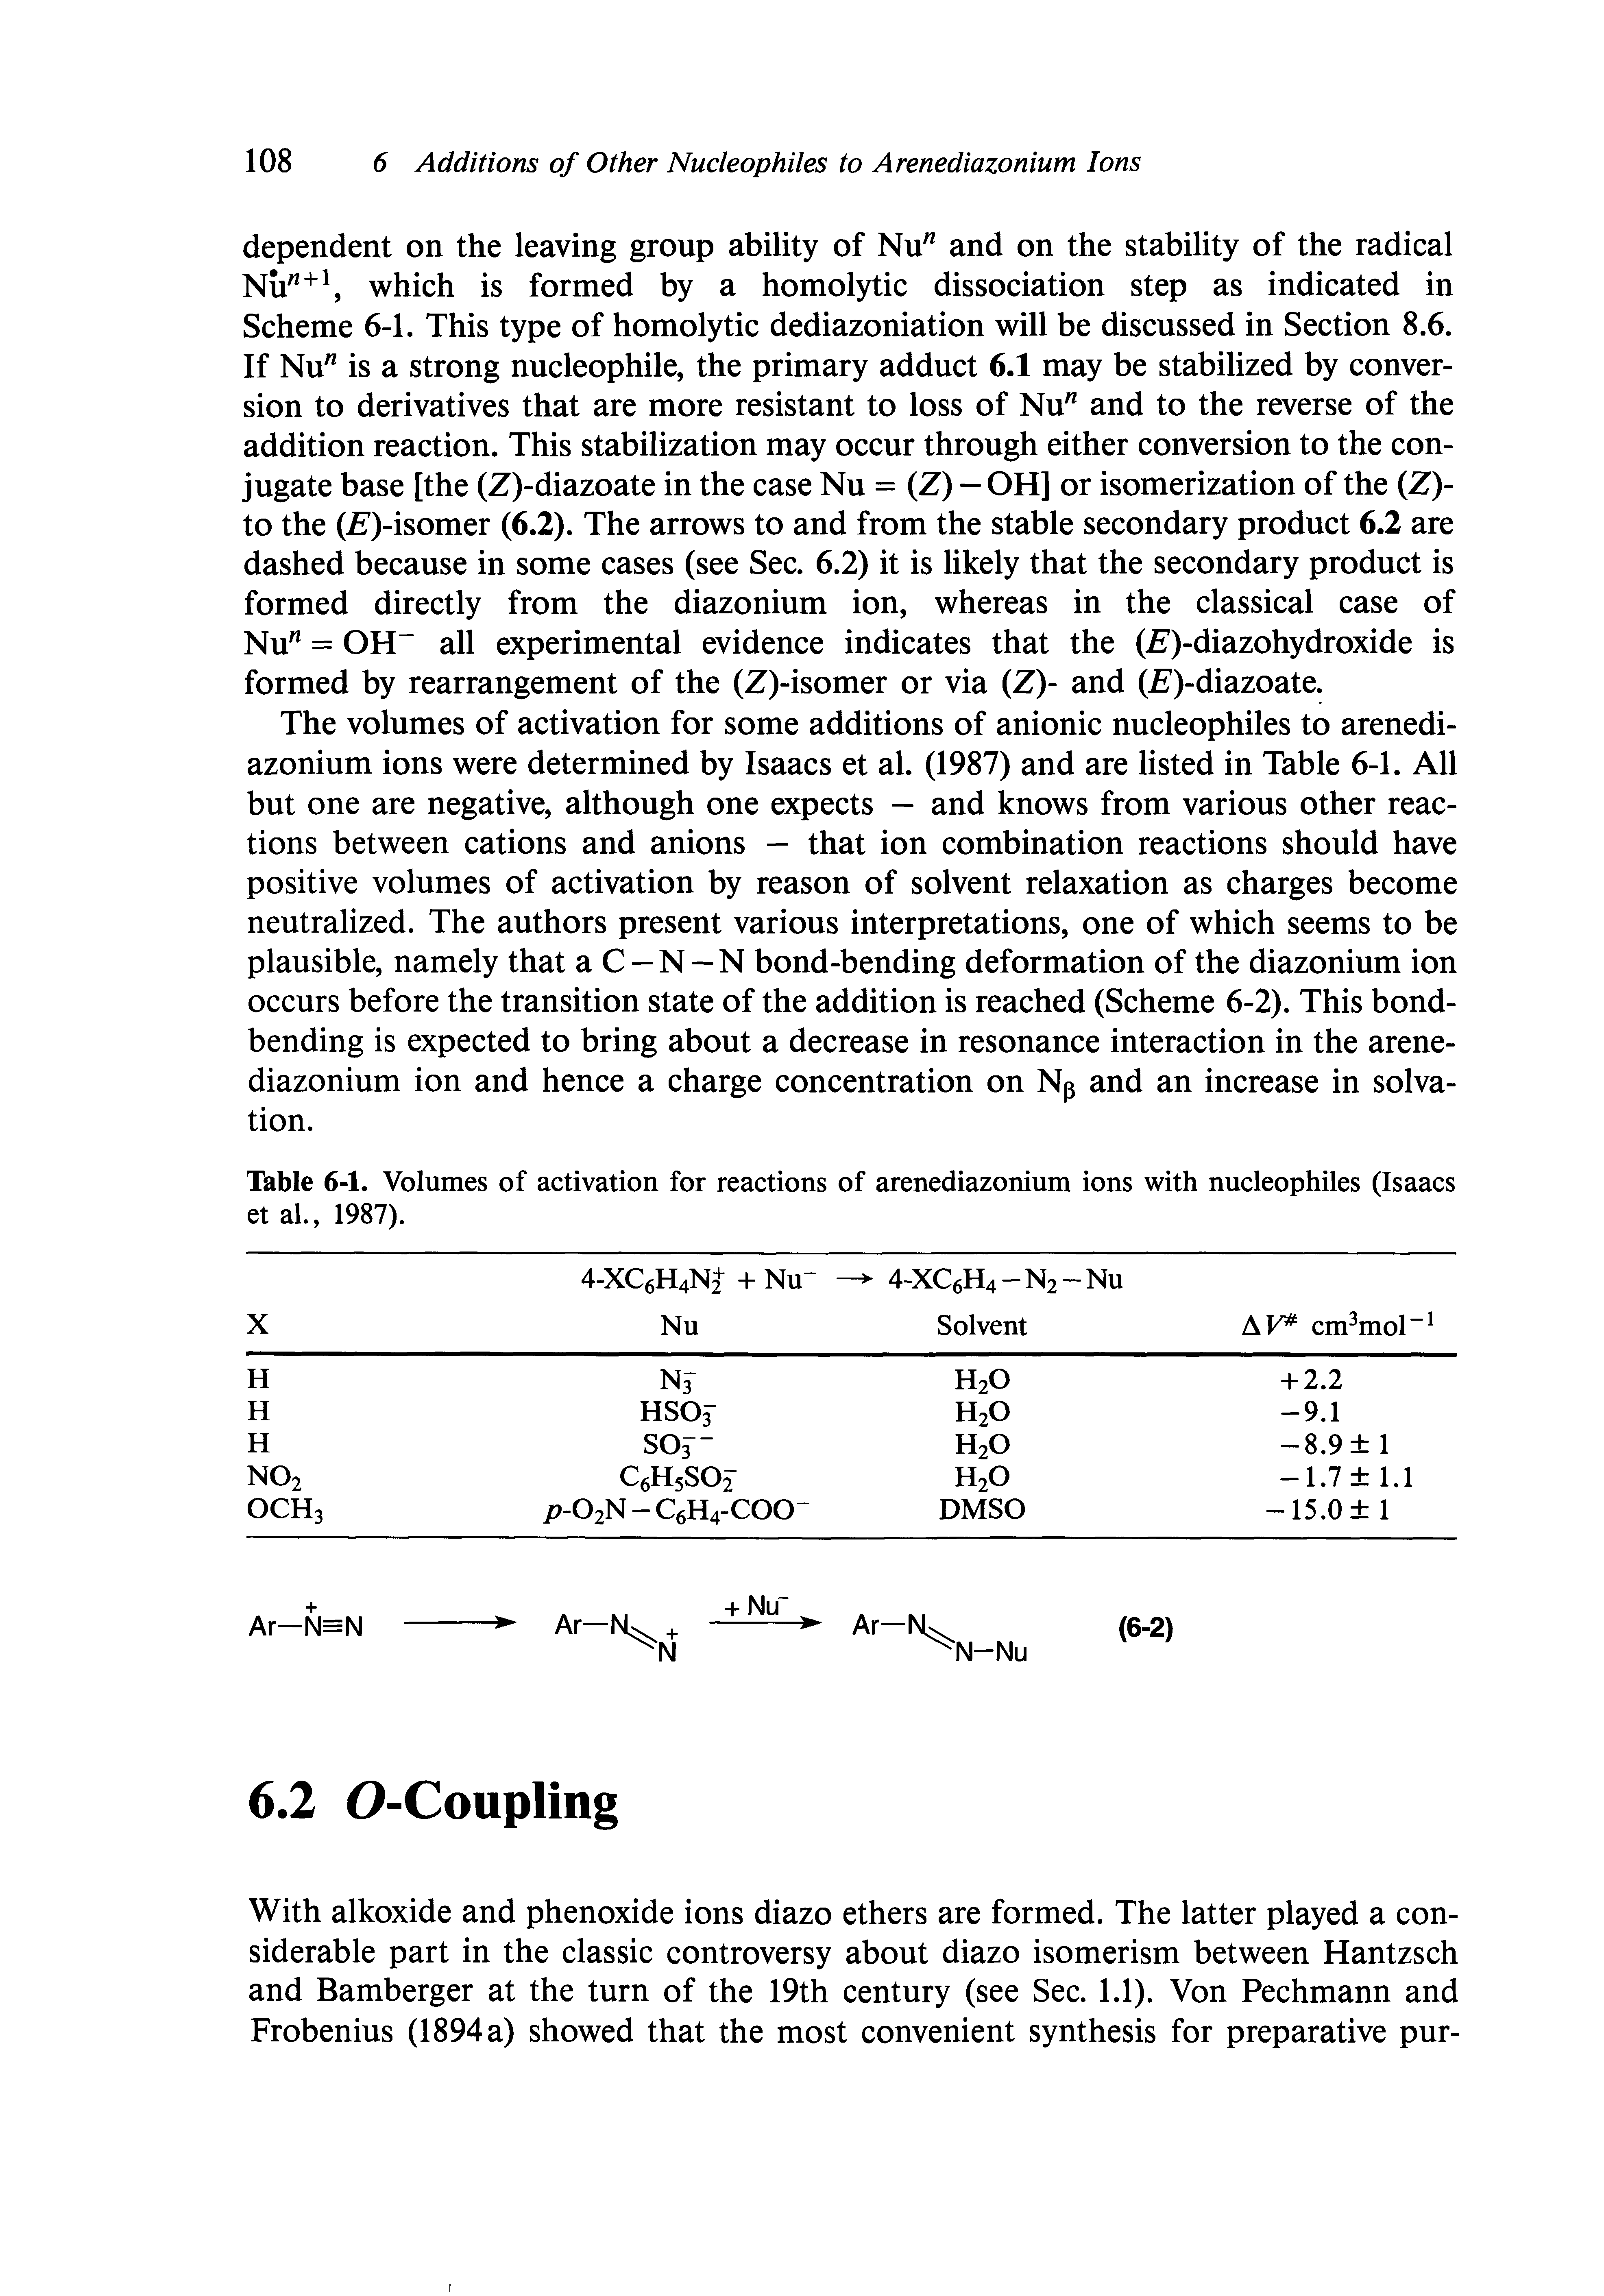 Table 6-1. Volumes of activation for reactions of arenediazonium ions with nucleophiles (Isaacs et al., 1987).